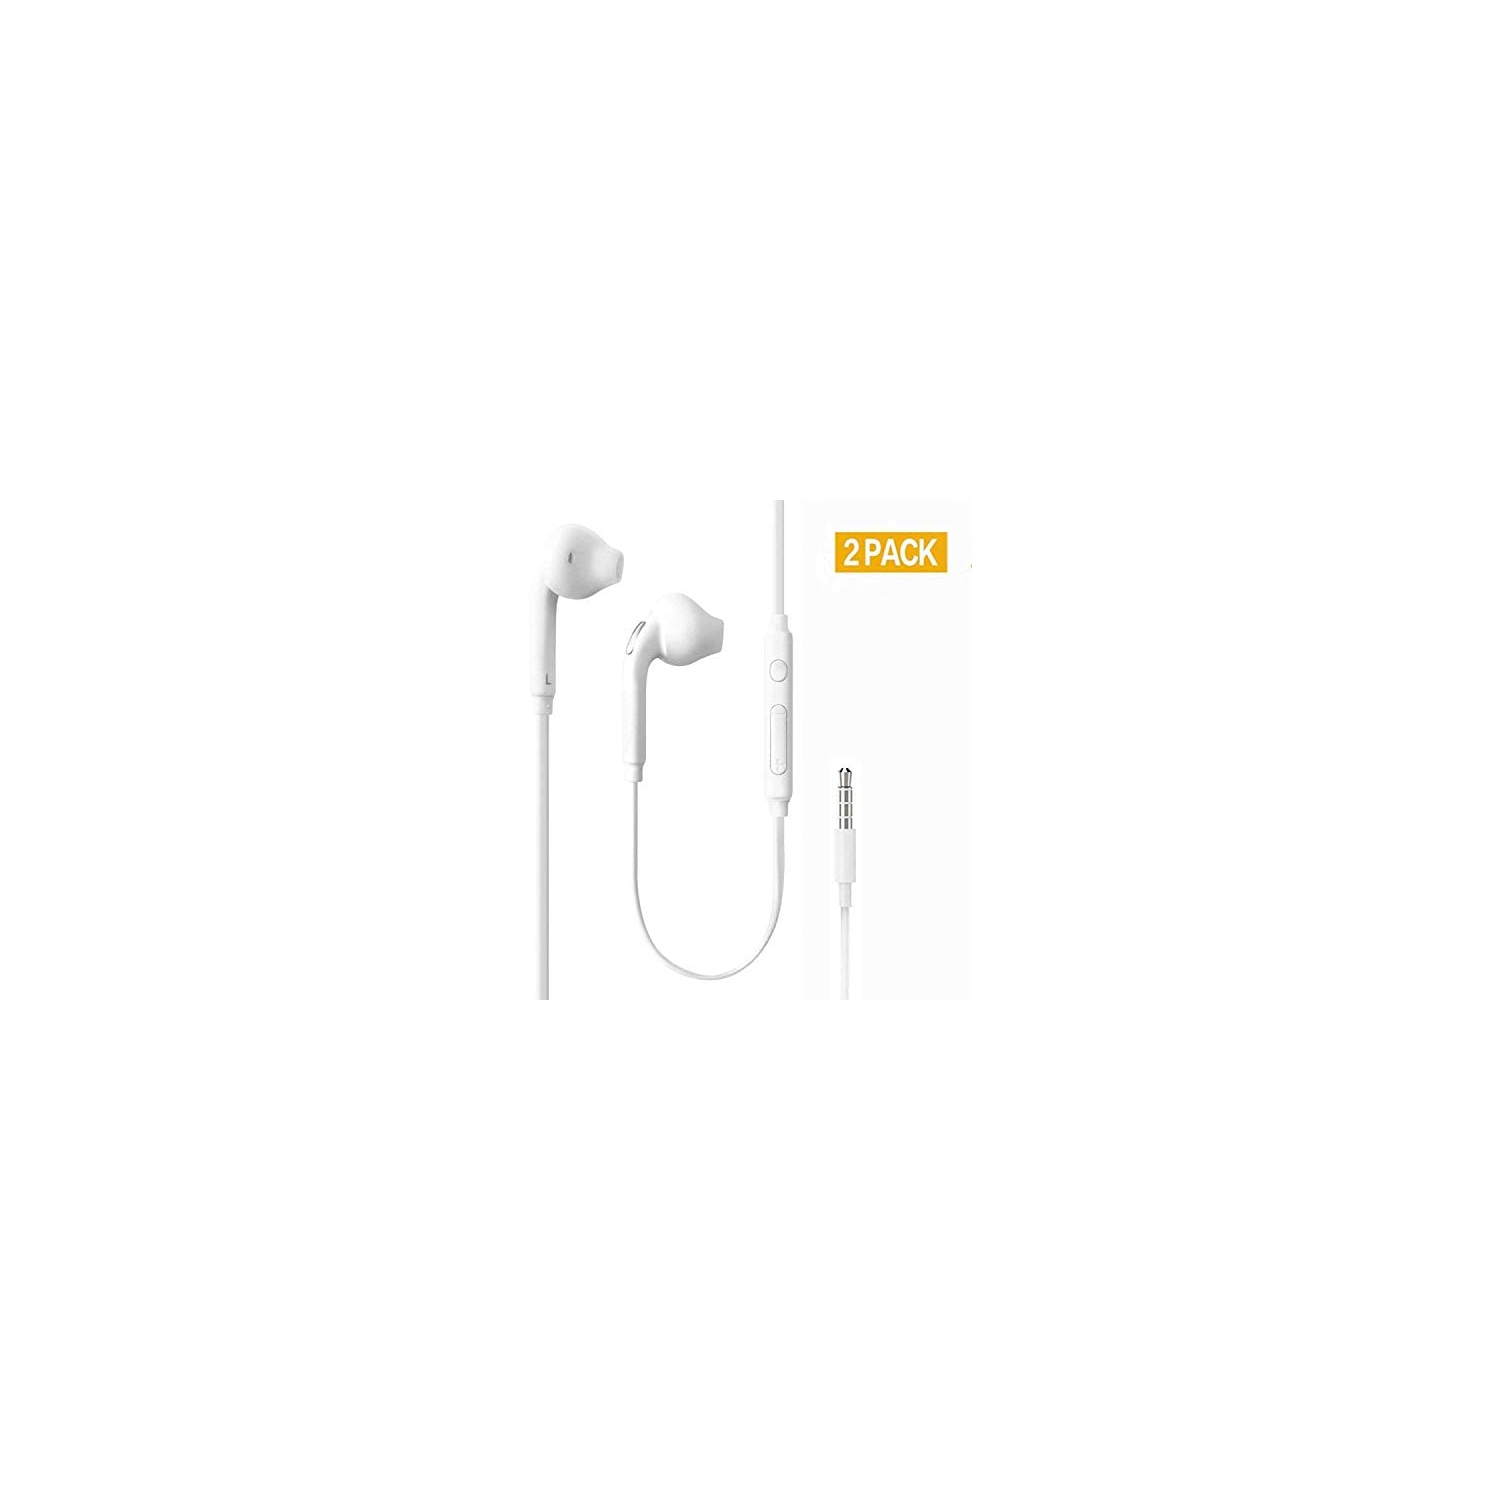 2 Pack Headphones/Earphones/Earbuds,3.5mm Aux Wired in-Ear Headphones with Mic and Remote Control for Samsung Galaxy S9